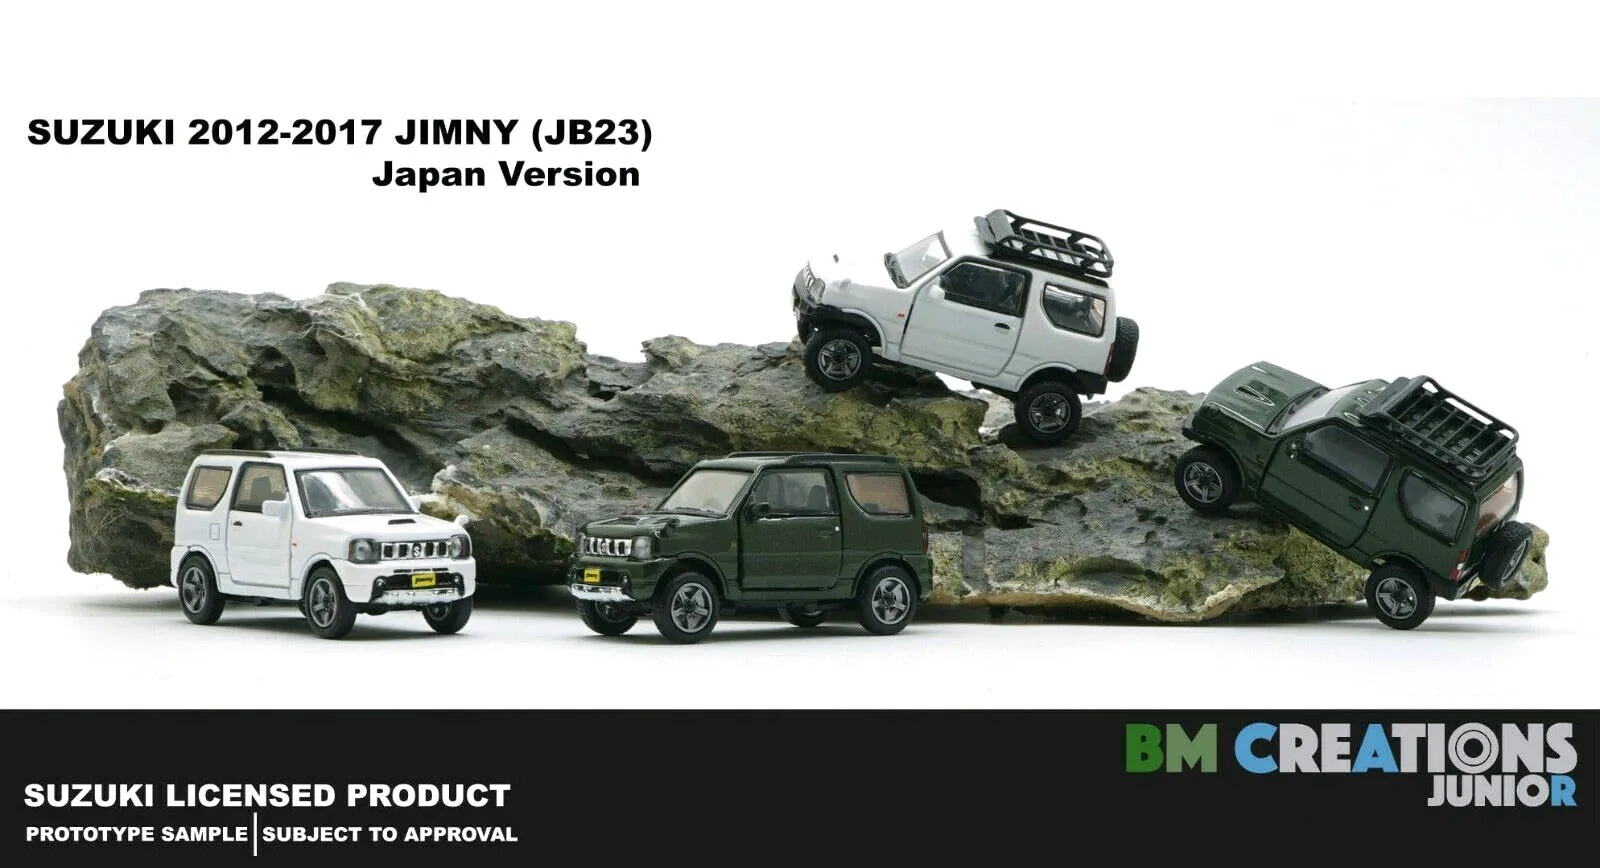 New BM 1/64 Scale Jimny JB23 Miniature Cars by BM Creations JUNIOR 3 inches Diecast toys For Collection Gift